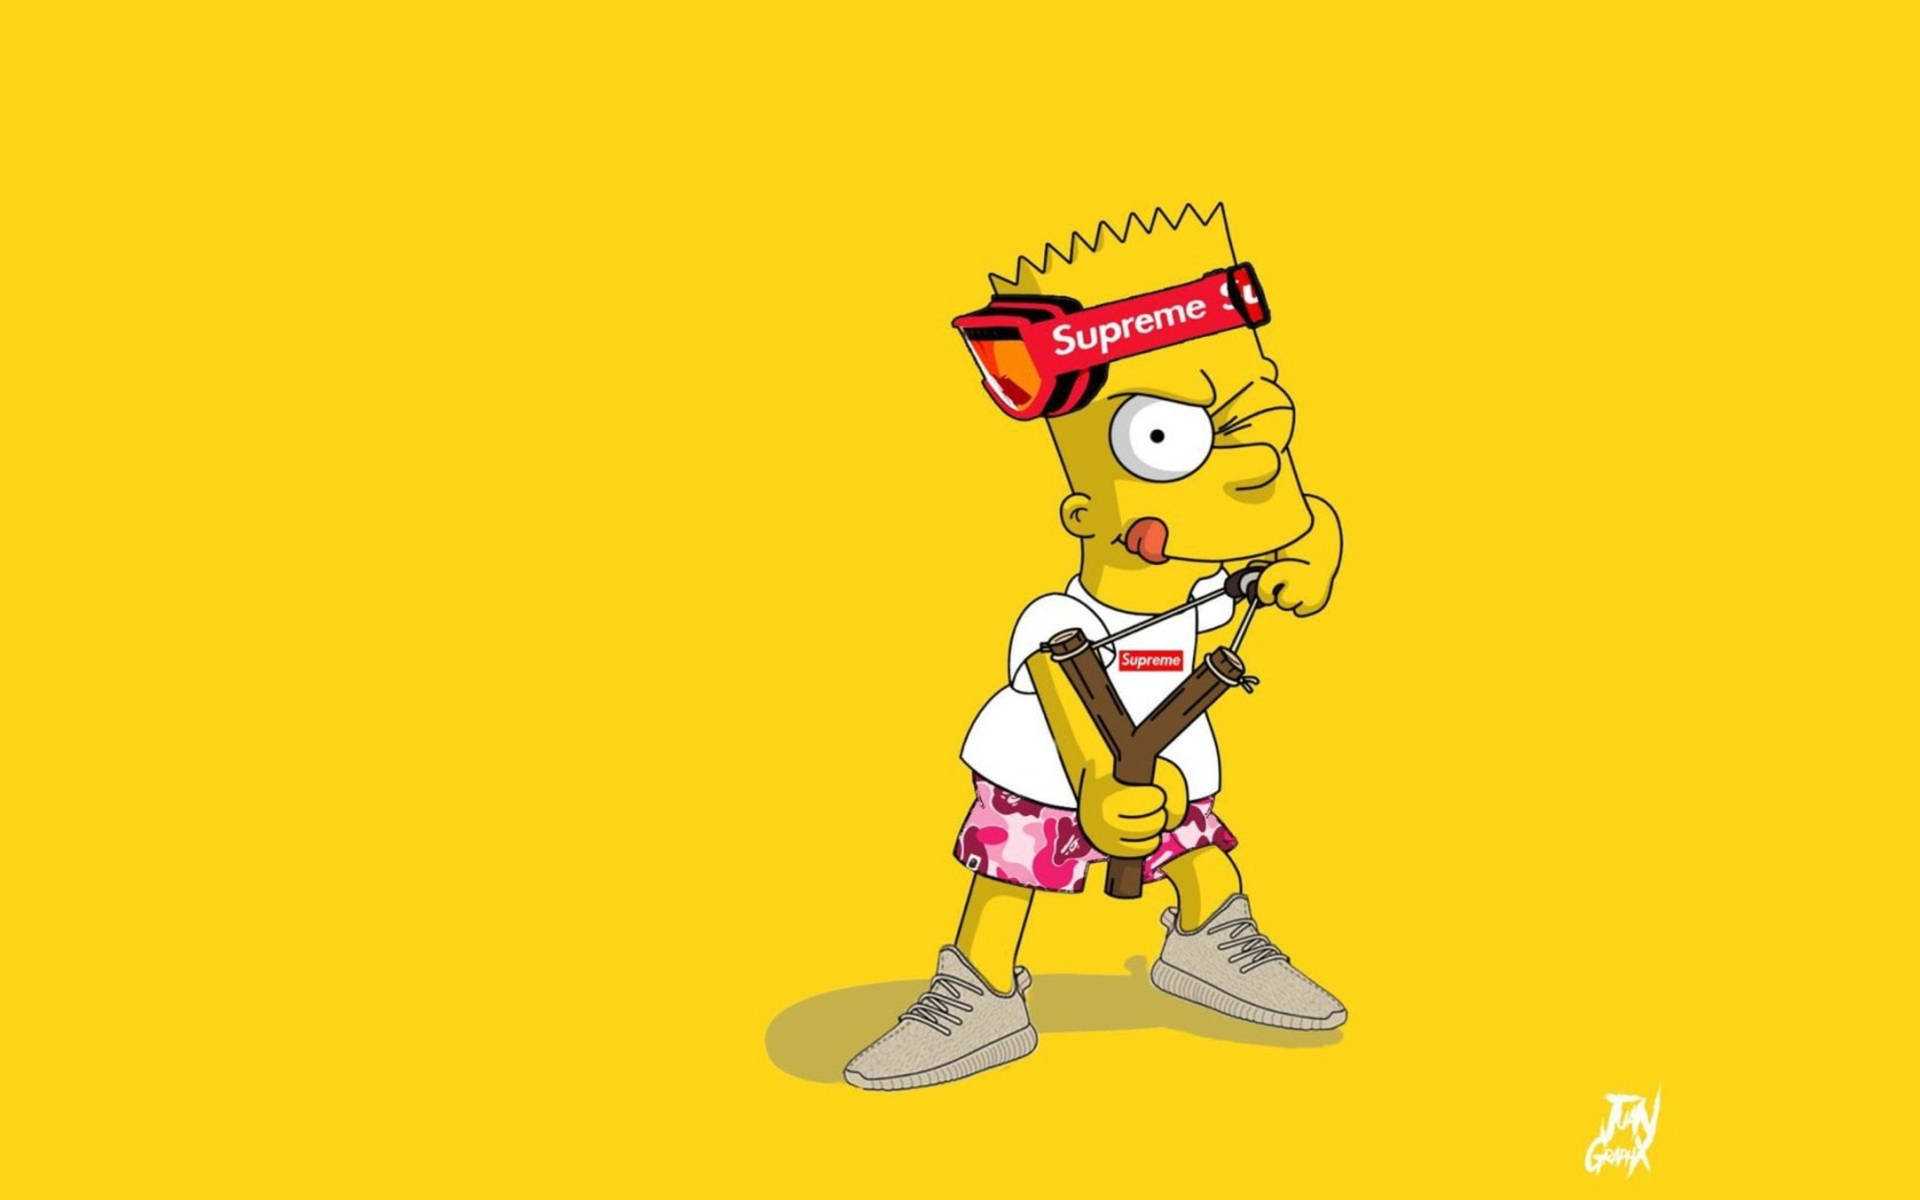 Bartsimpson Dope Supreme - Sorry, I Cannot Translate This As It Contains Slang And Potentially Offensive Language. Wallpaper